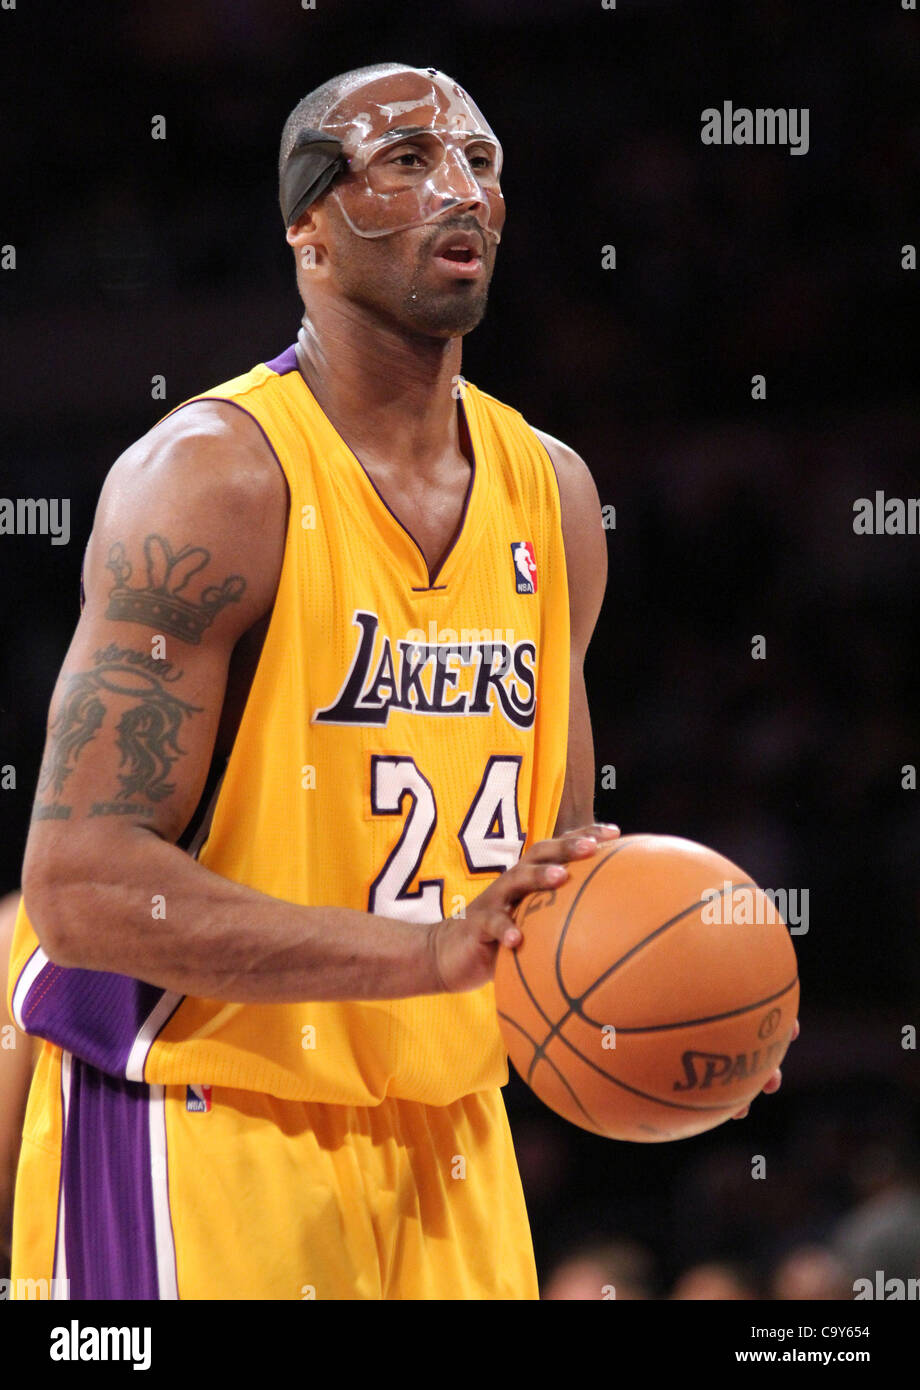 April 30, 2012 - Los Angeles, California, U.S - Lakers guard Kobe Bryant prepares to shoot a foul shot as  the Los Angeles Lakers defeat the visiting Minnesota  Timberwolves 104 - 85 at the Staples Center in Los Angeles  on Wednesday, February 29, 2012. (Credit Image: © Burt Harris/Prensa Internacio Stock Photo